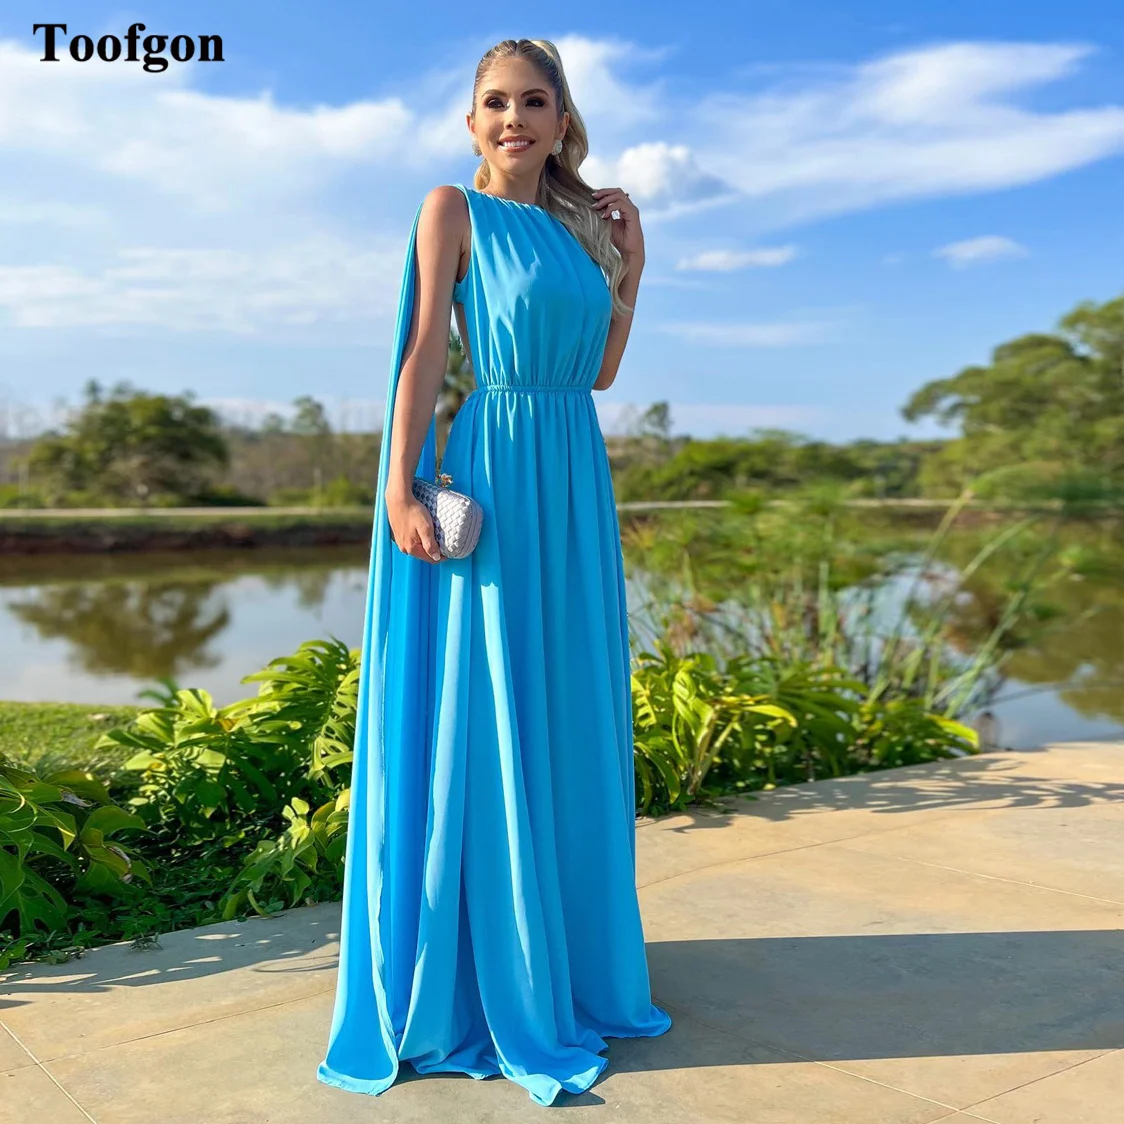 

Toofgon Simple Blue Chiffon Long Evening Dresses Sexy Backless Prom Party Gowns Korea Lady Formal Wedding Bridesmaid Dress